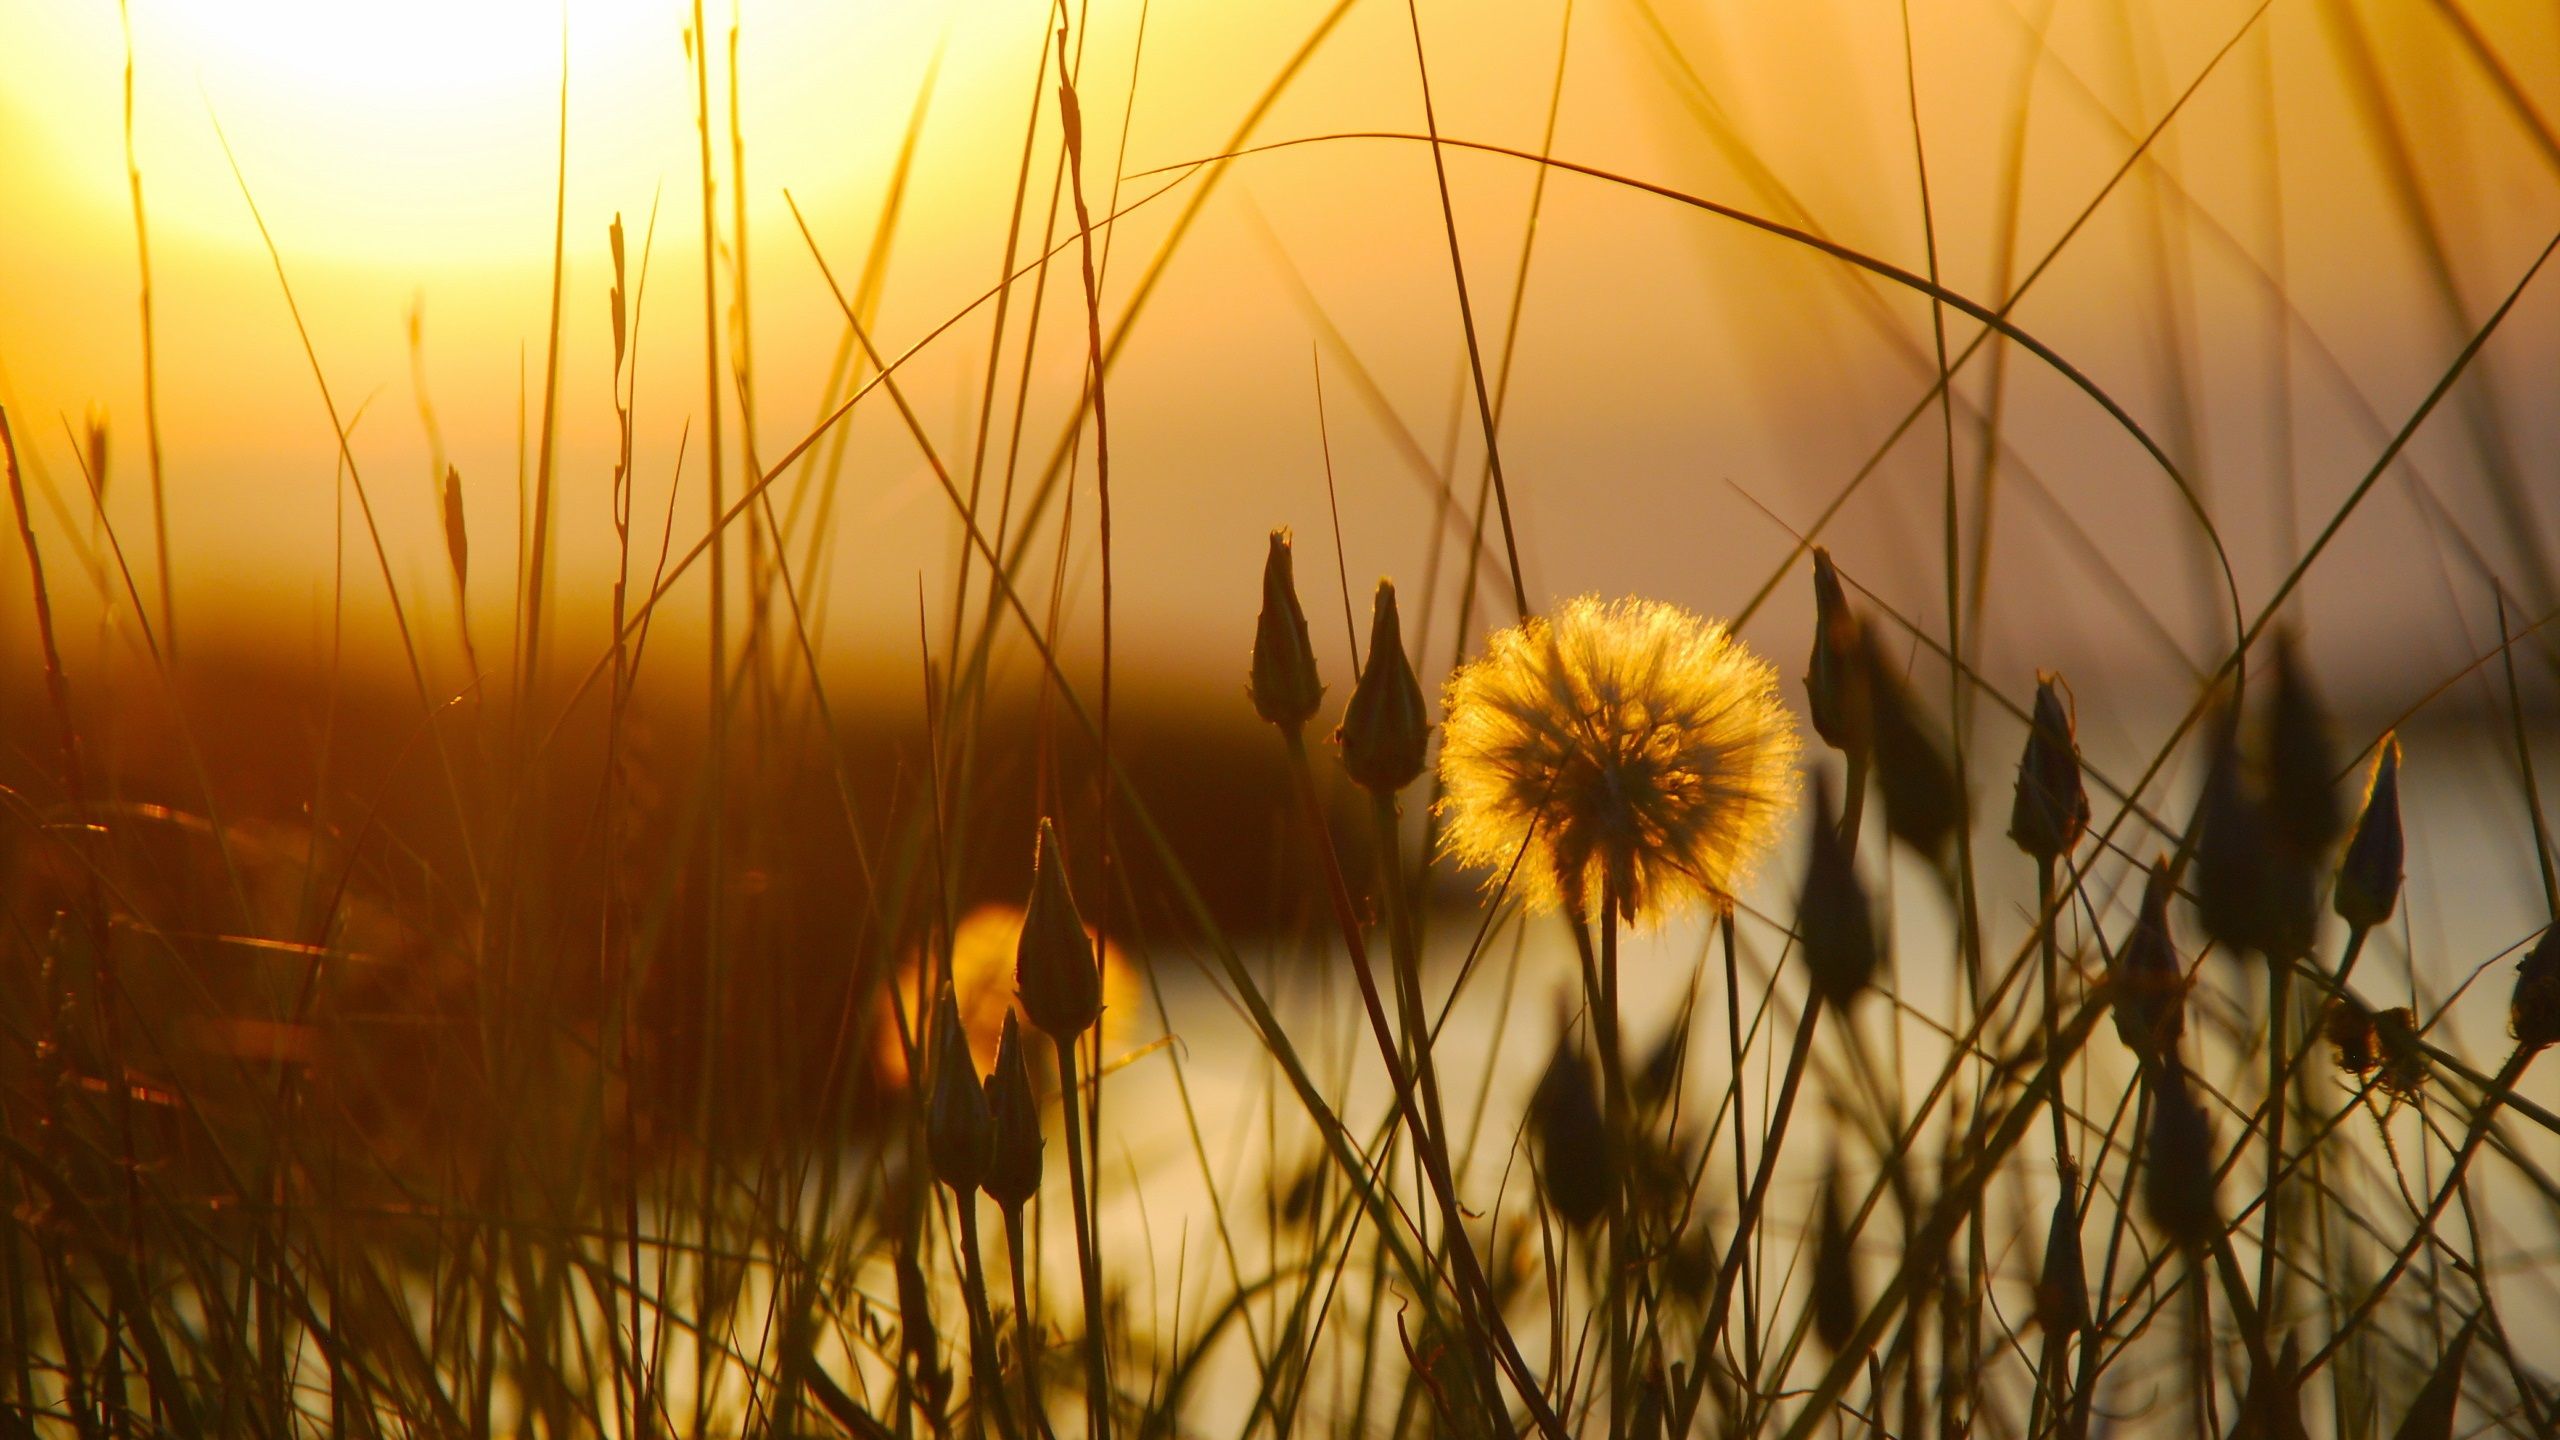 Sunset, Grass, Flower, Dusk, Early Summer 750x1334 IPhone 8 7 6 6S Wallpaper, Background, Picture, Image